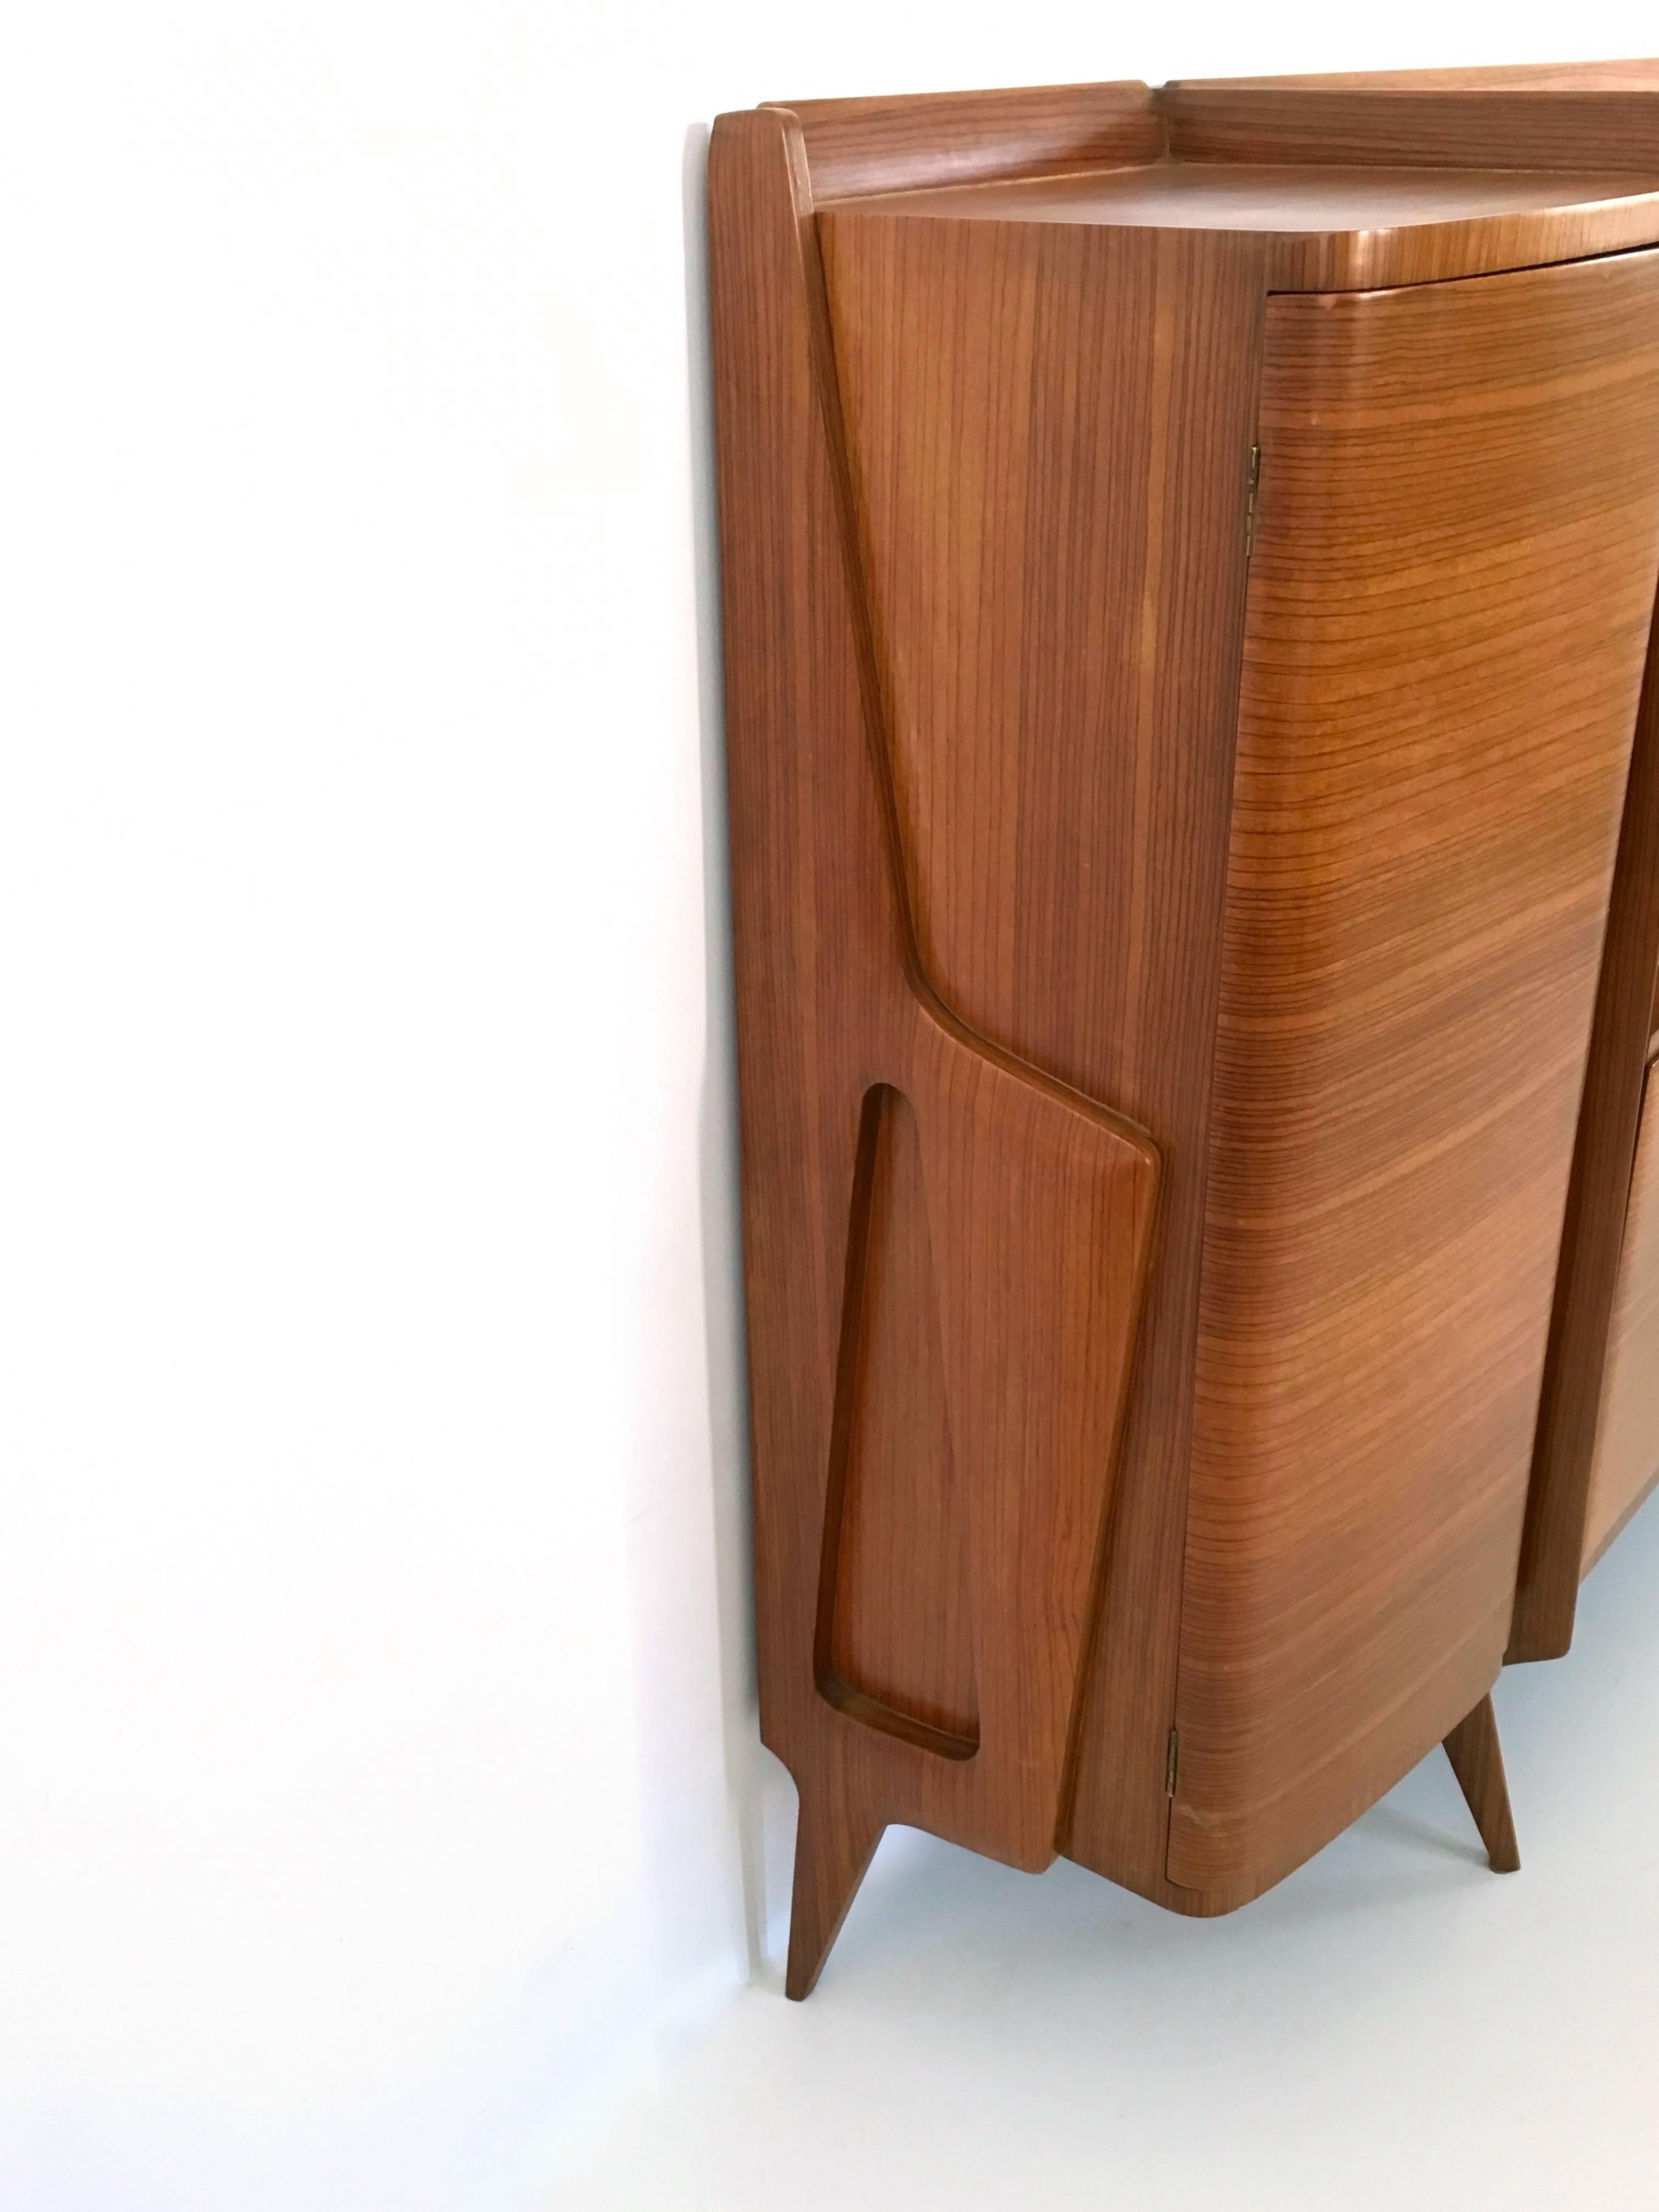 Monumental Wooden Cabinet with Parchment Panels by Gio Ponti, Italy For Sale 3